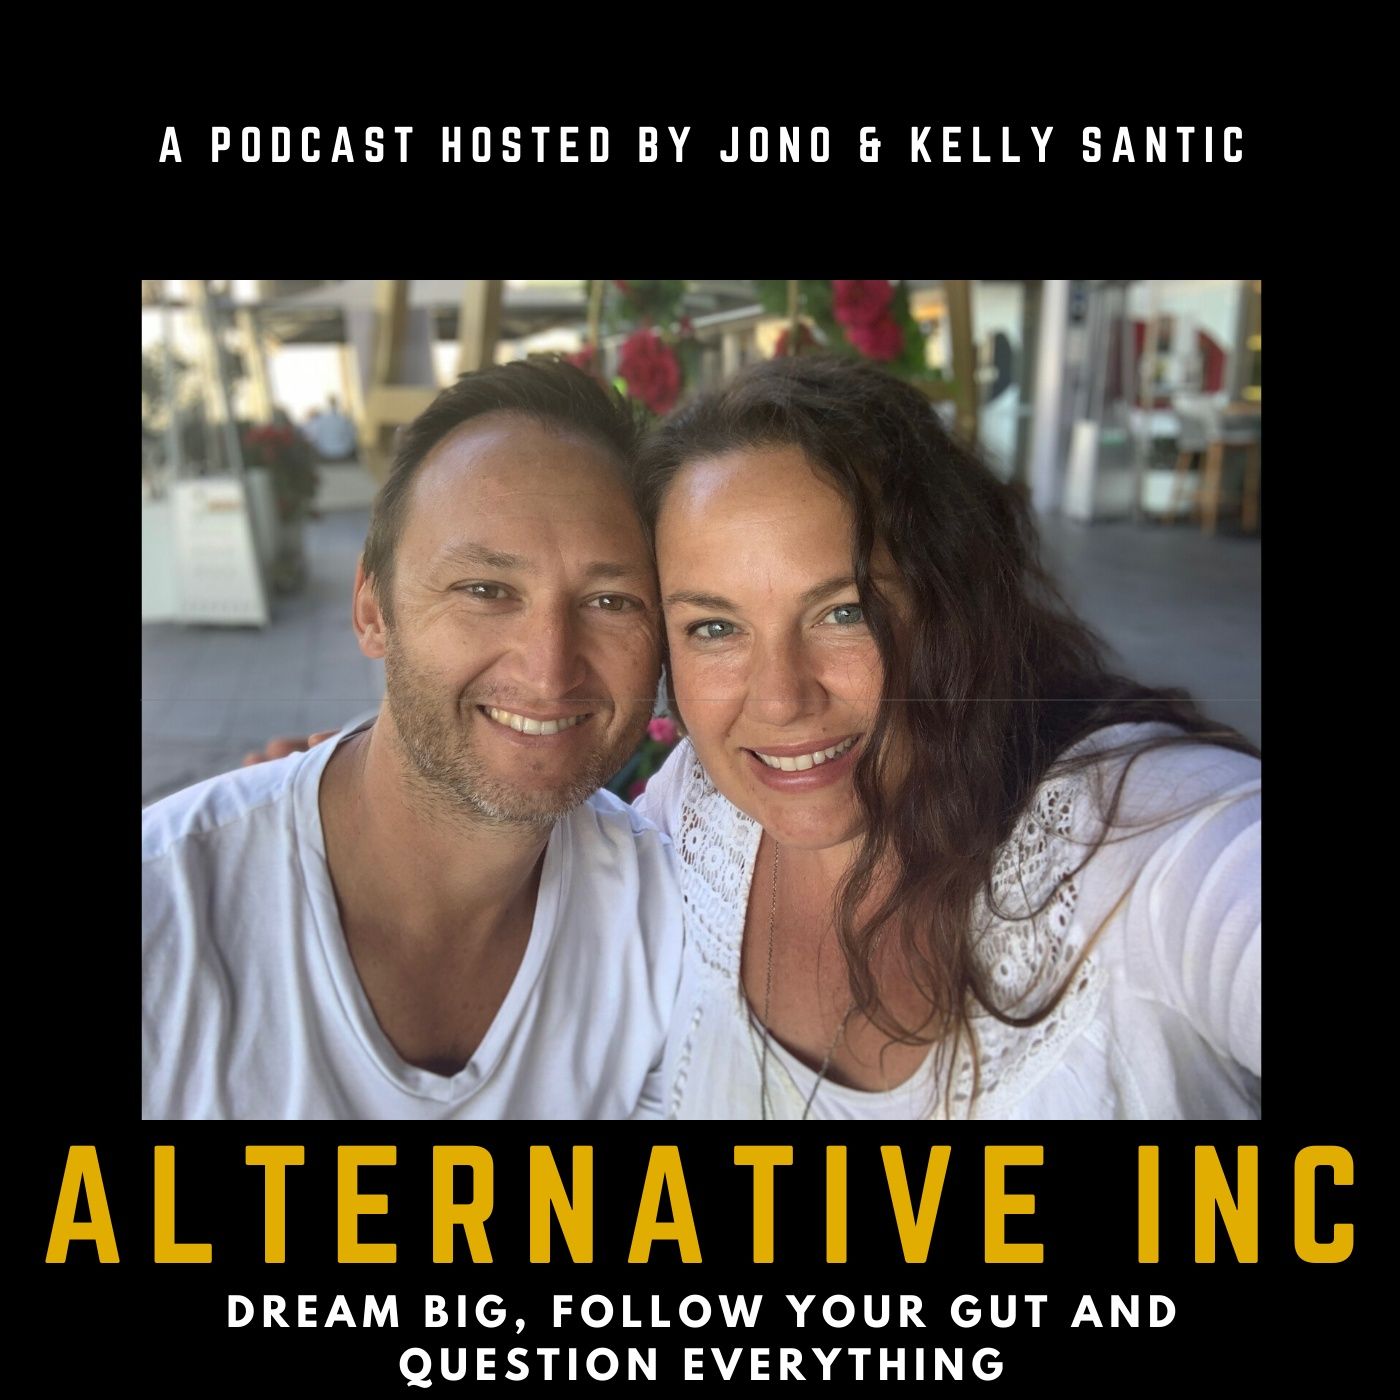 Question Everything - Jono and Kelly Santic